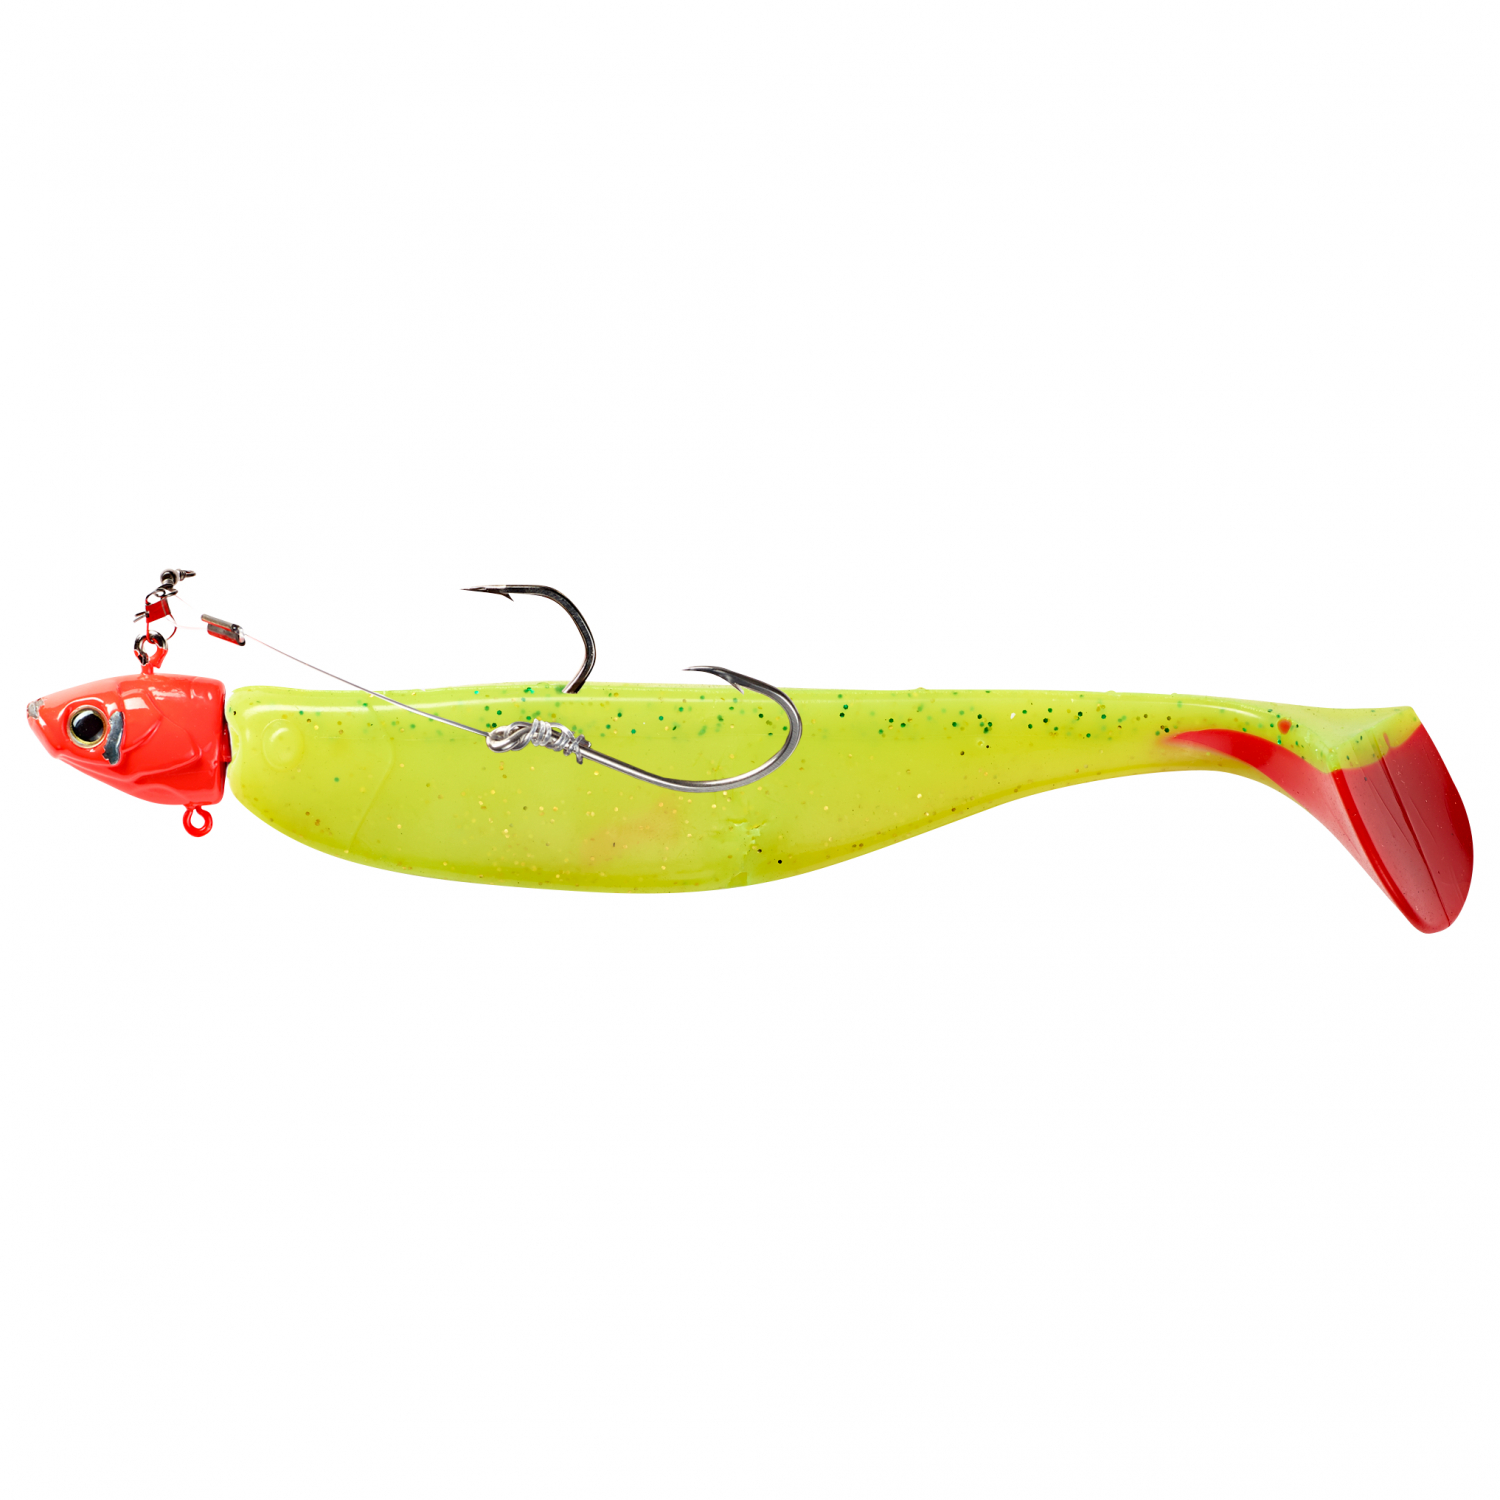 Kogha Softbait The Attractable (Chartreuse/Red Tail) 